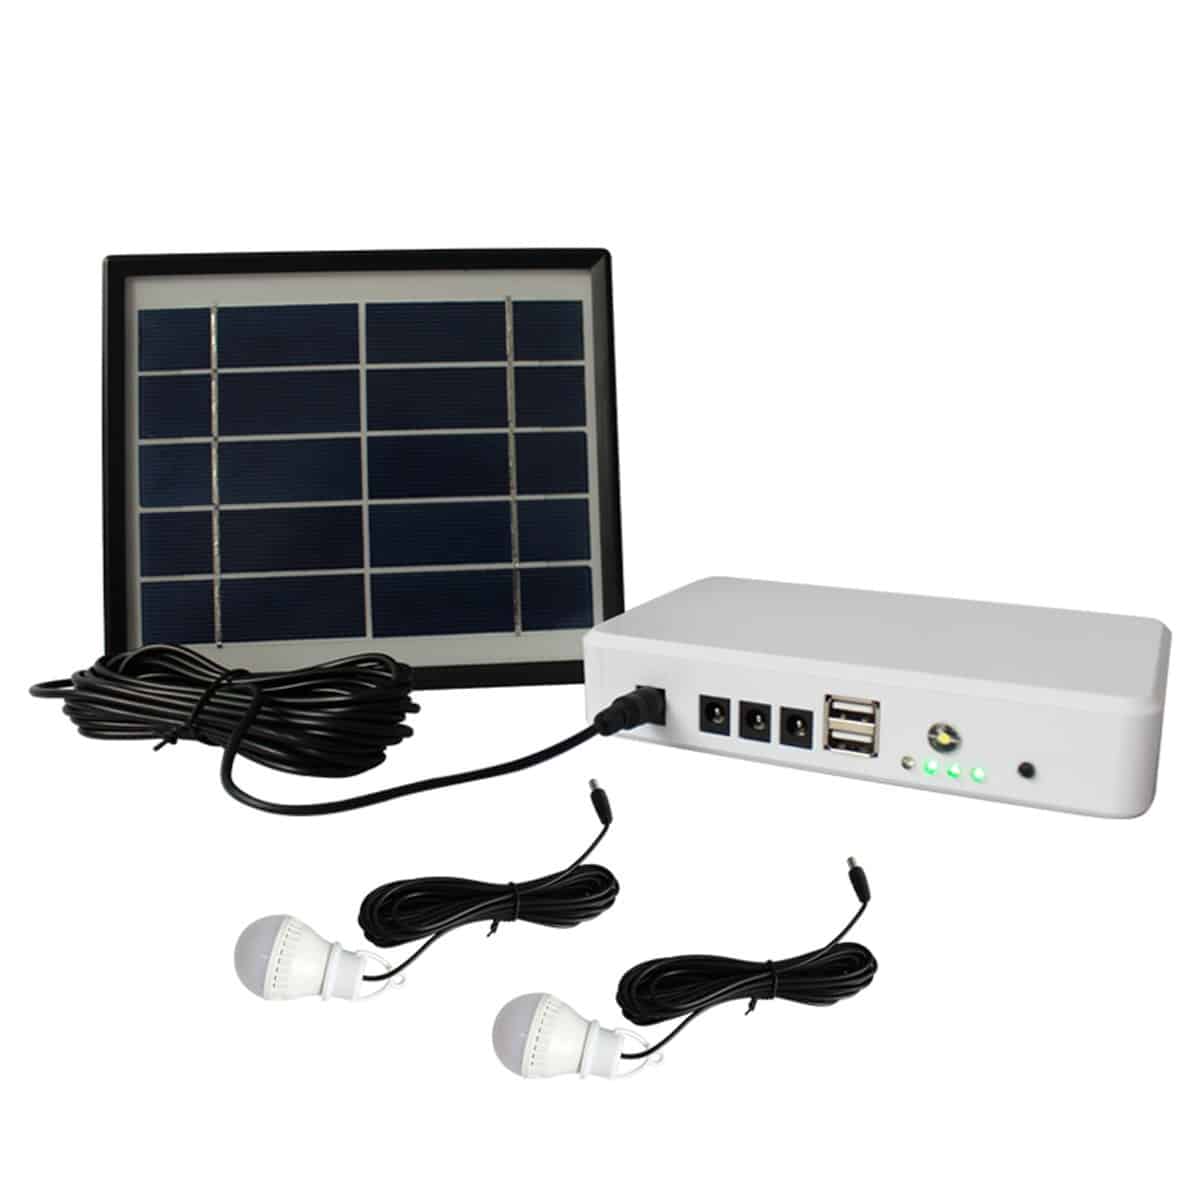 5V Solar Power Storage Generator 2 USB Charger 3 LED Bulbs Home System Rechargeable Solar Power Panel Storage Generators